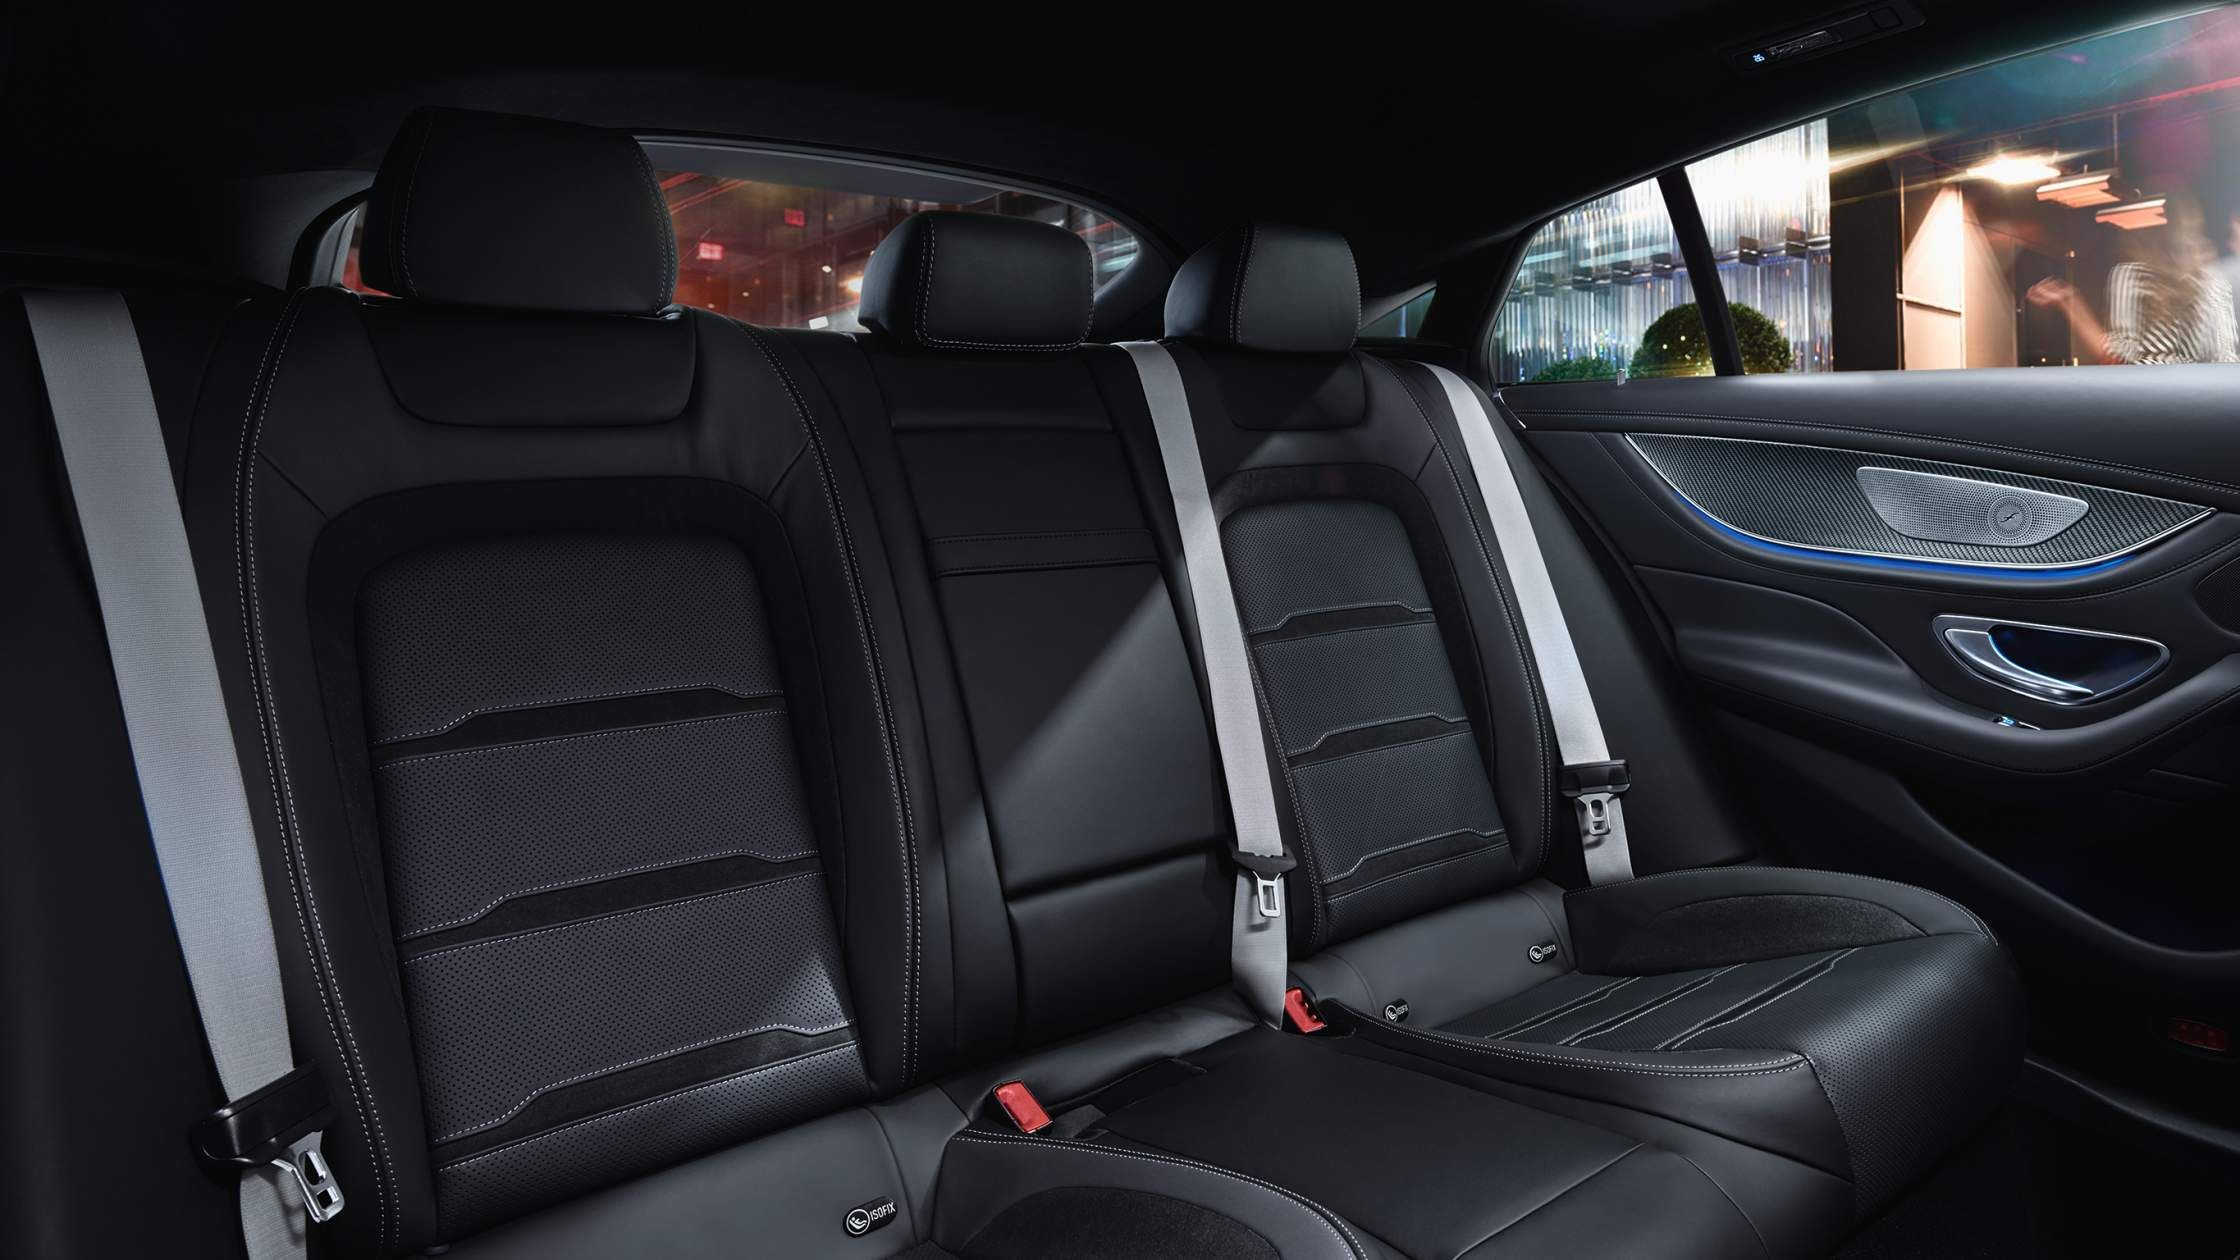 The rear seats of the Mercedes-AMG GT63.